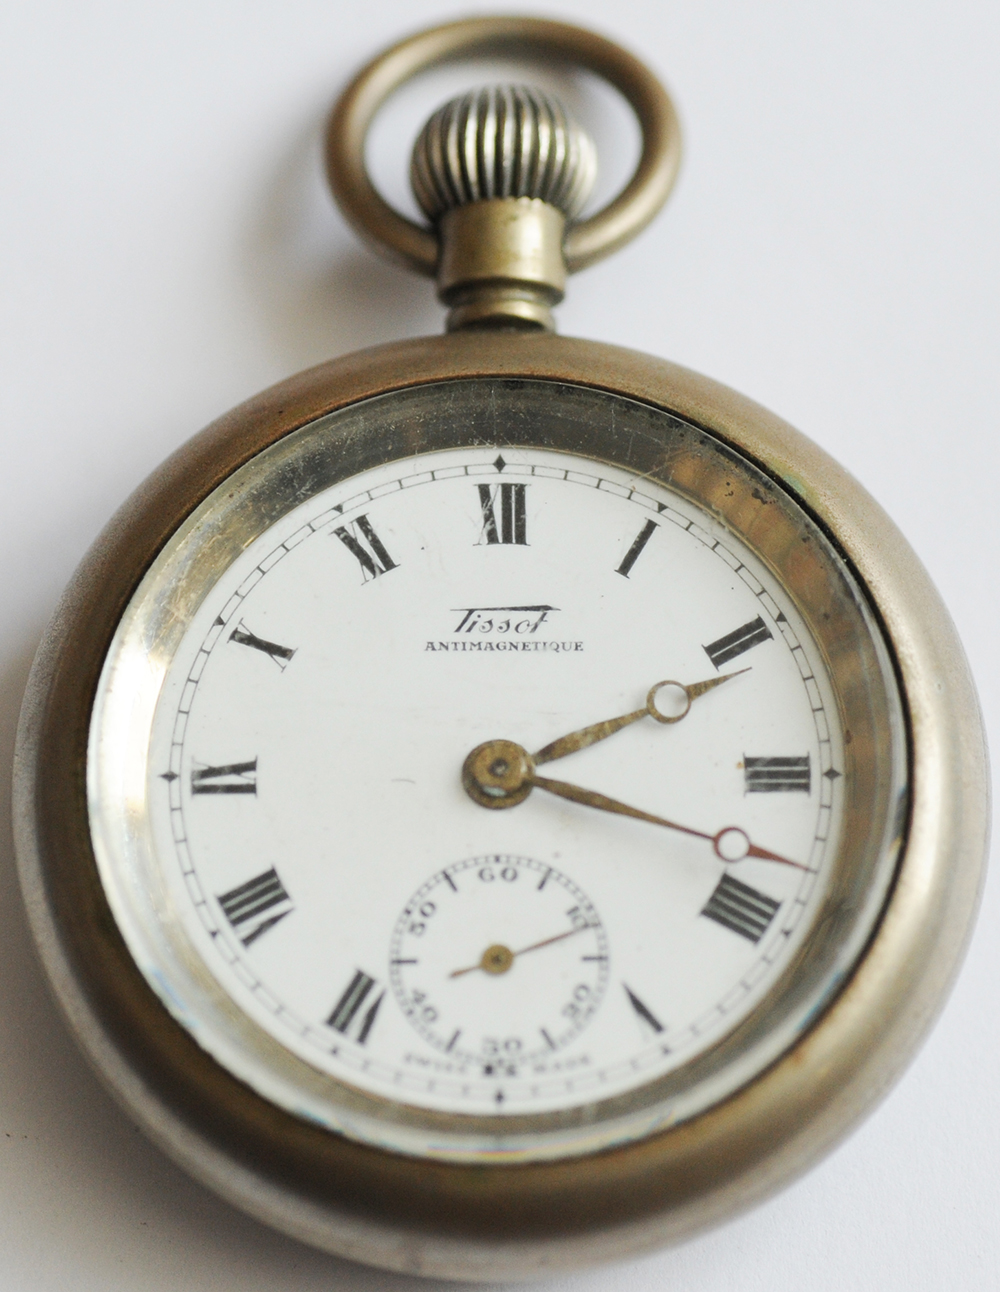 BR(E) Pocketwatch engraved on rear 'B.R.(E) 9489'.Swiss Made Tissot Antimagnetique with second - Image 2 of 2